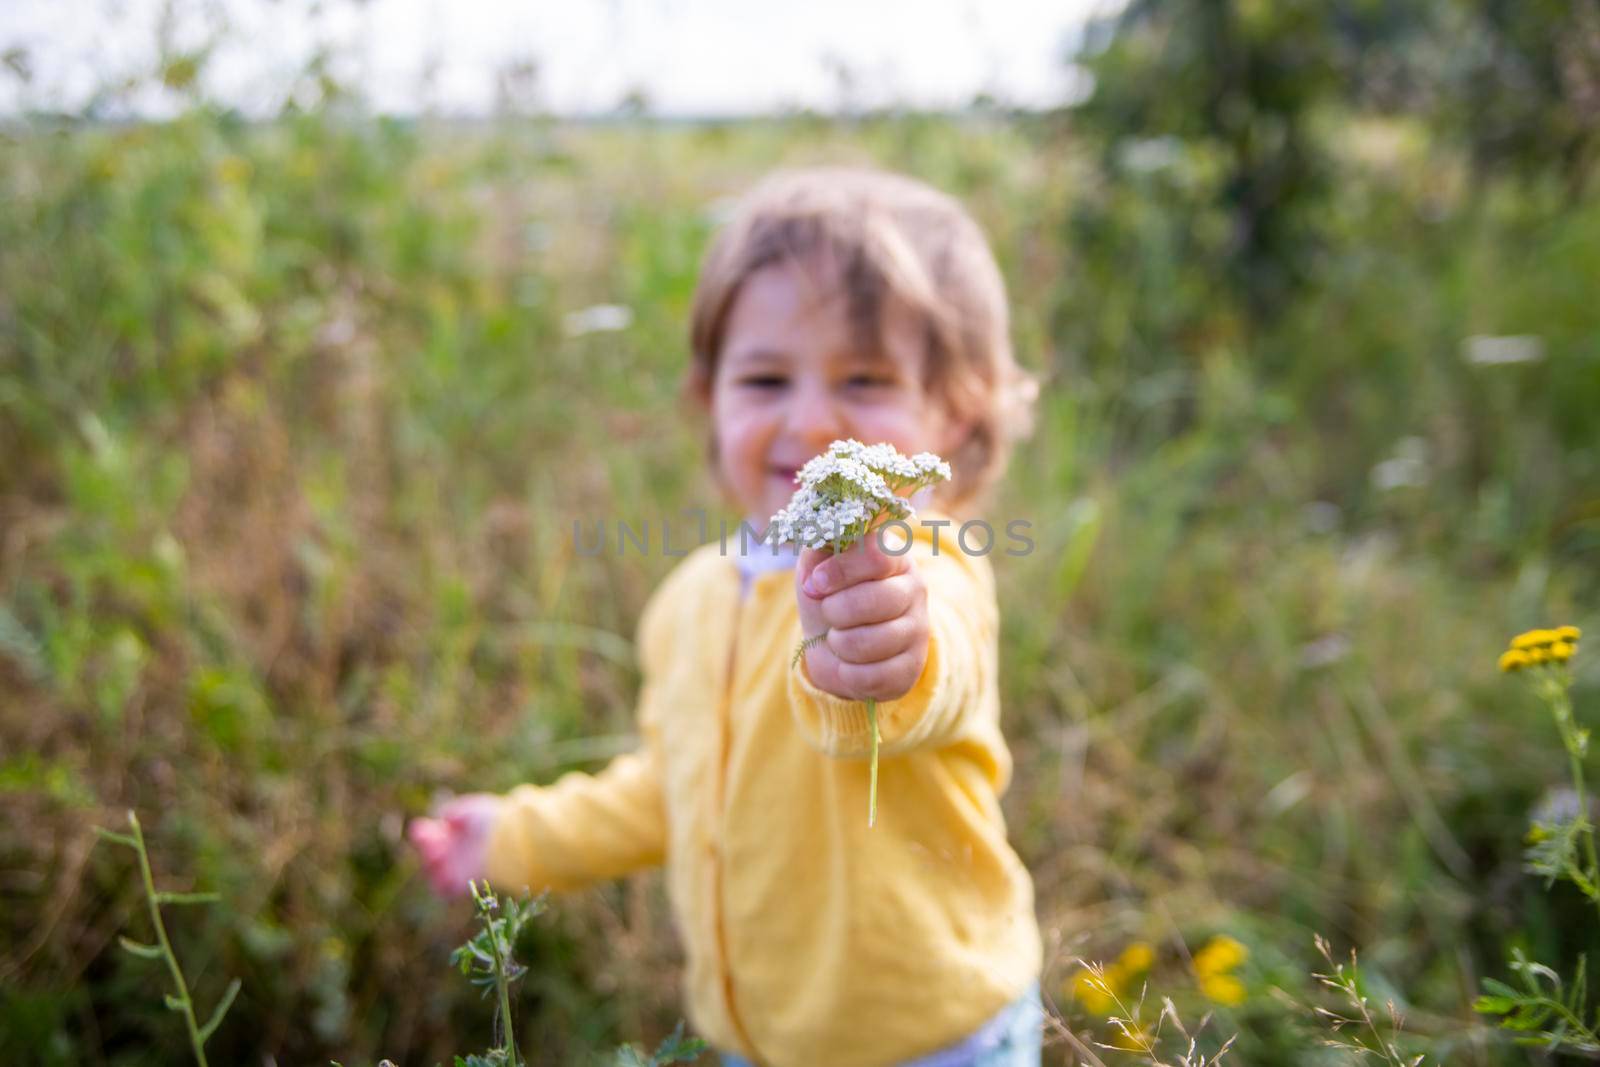 adorable little toddler stretches a flower into the camera in a summer field on a sunny day